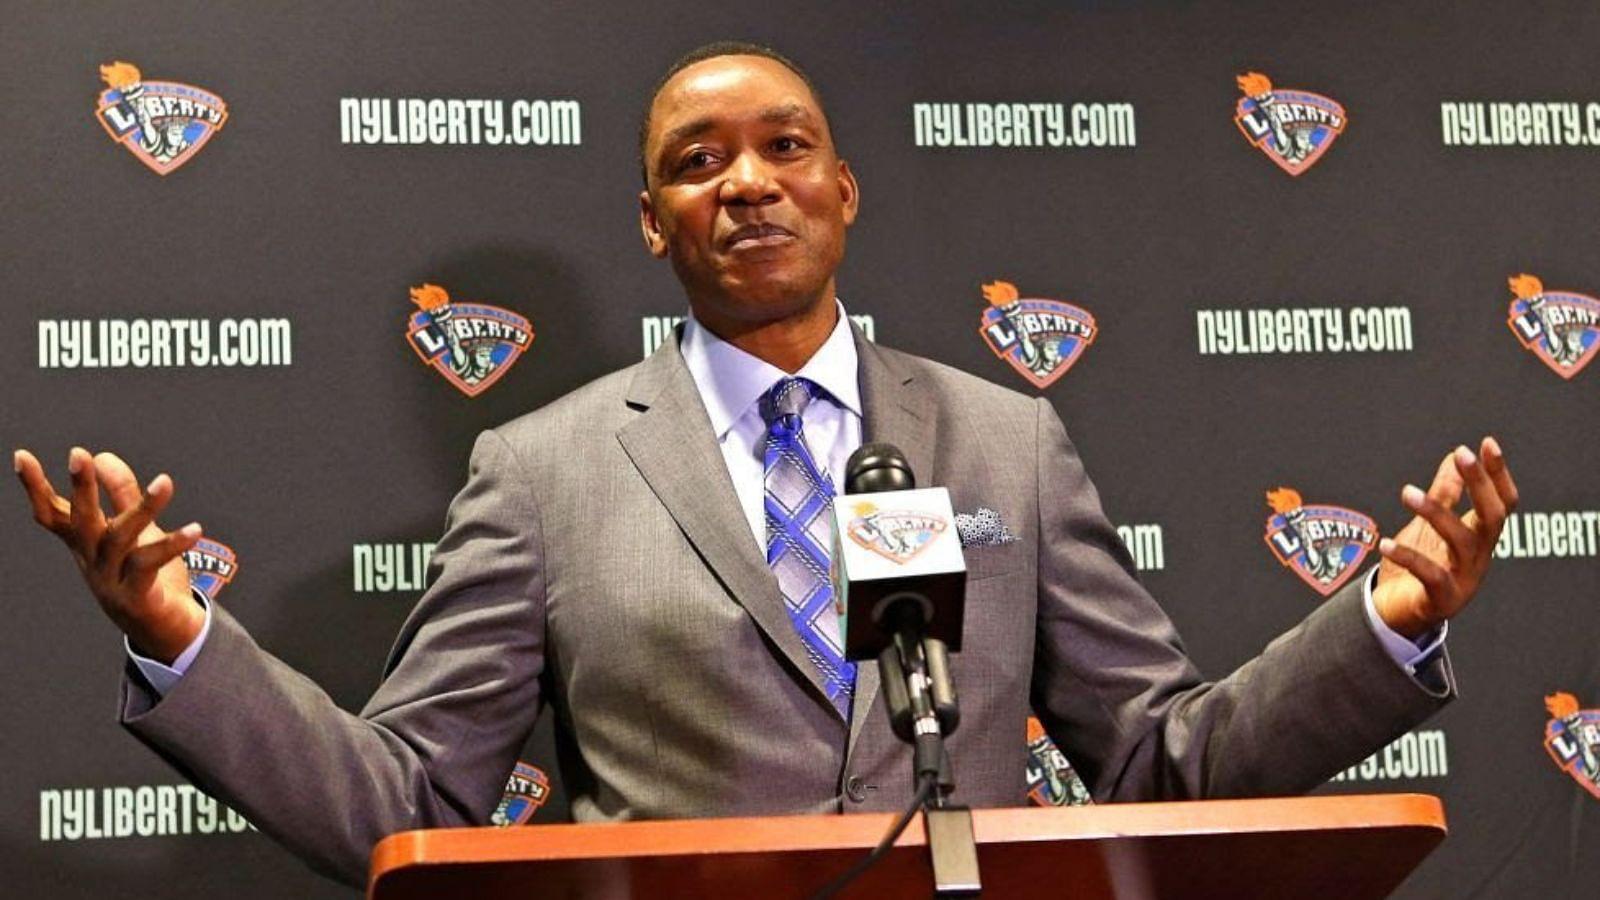 Isiah Thomas and Knicks faced s*xual harassment charges leading to a $11.6 million payout to the victim